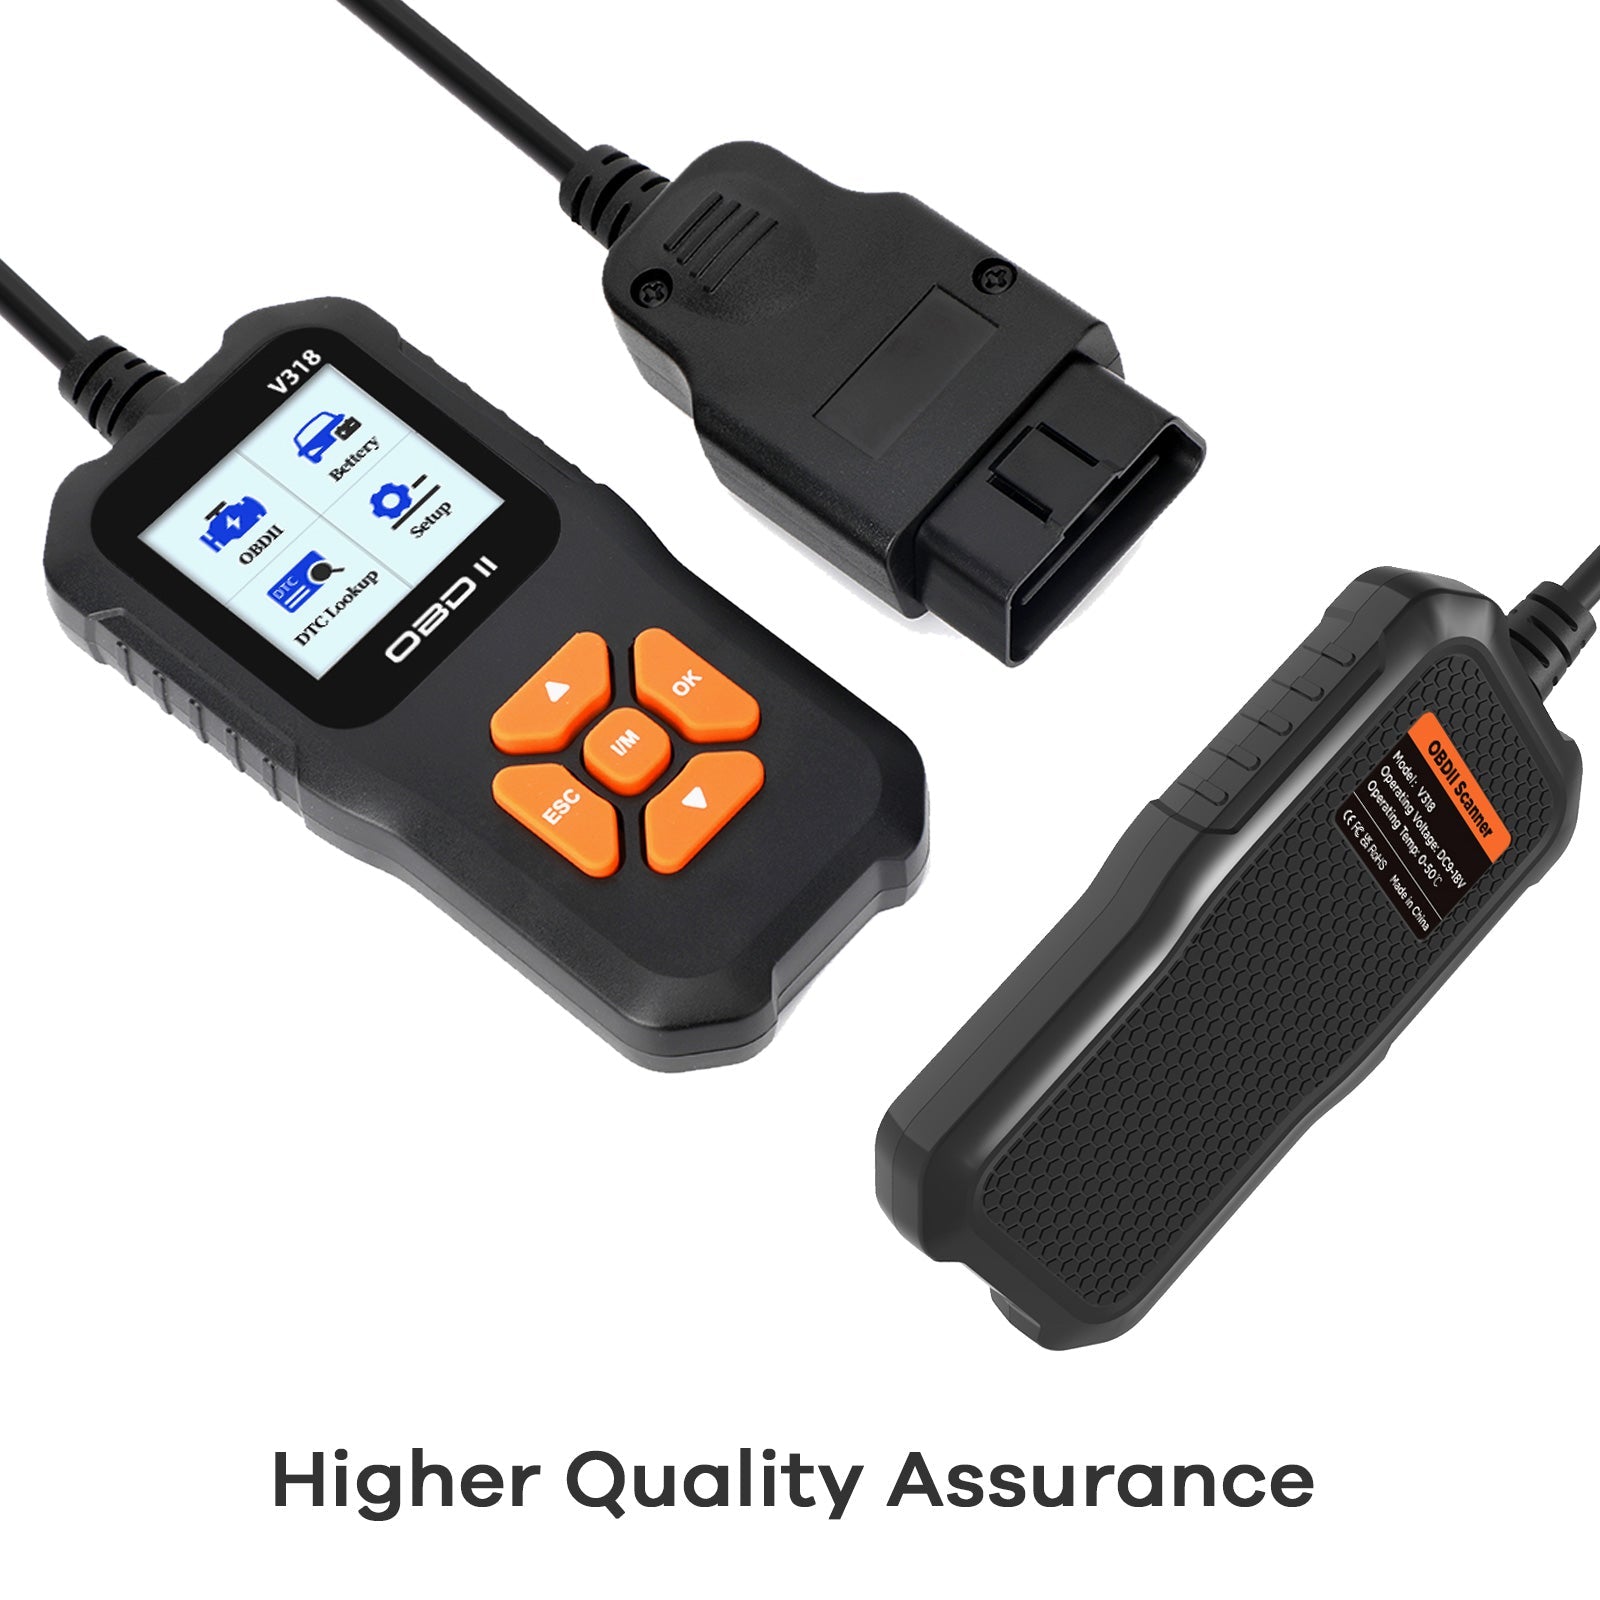 OBD Power Adapter with USB Cable - Dash Cam Power Supply Switch & OBD  Connection Kit for Enhanced Vehicle Monitoring and Surveillance